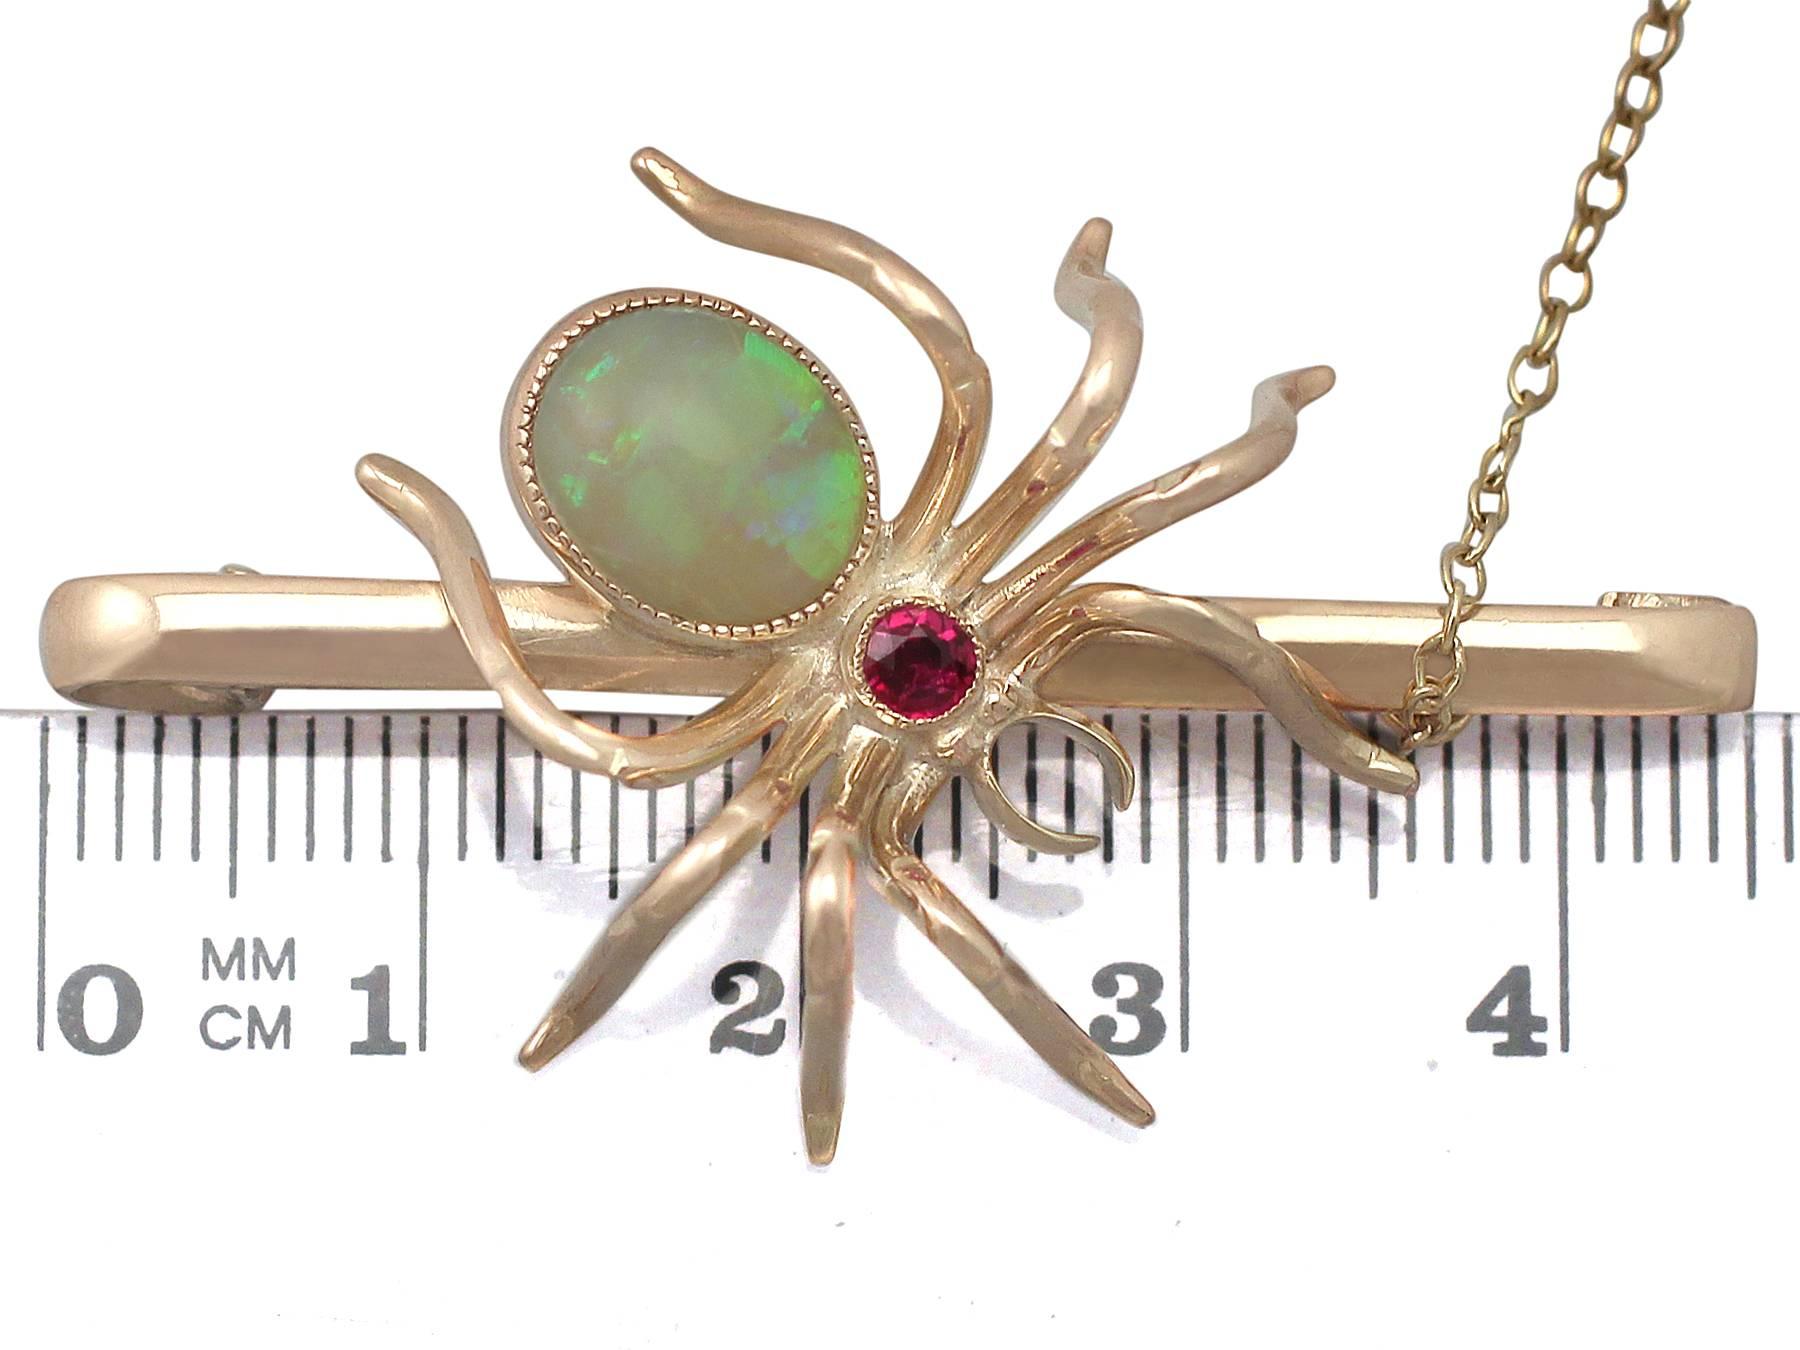 Women's 1.22Ct Opal & 0.10Ct Ruby, 9k Yellow Gold 'Spider' Brooch - Antique Circa 1900